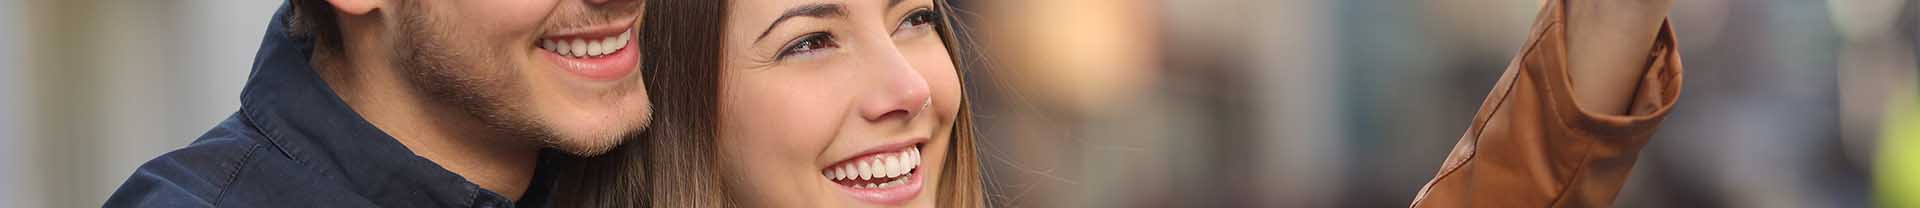 Dental Care Services in Shelbyville